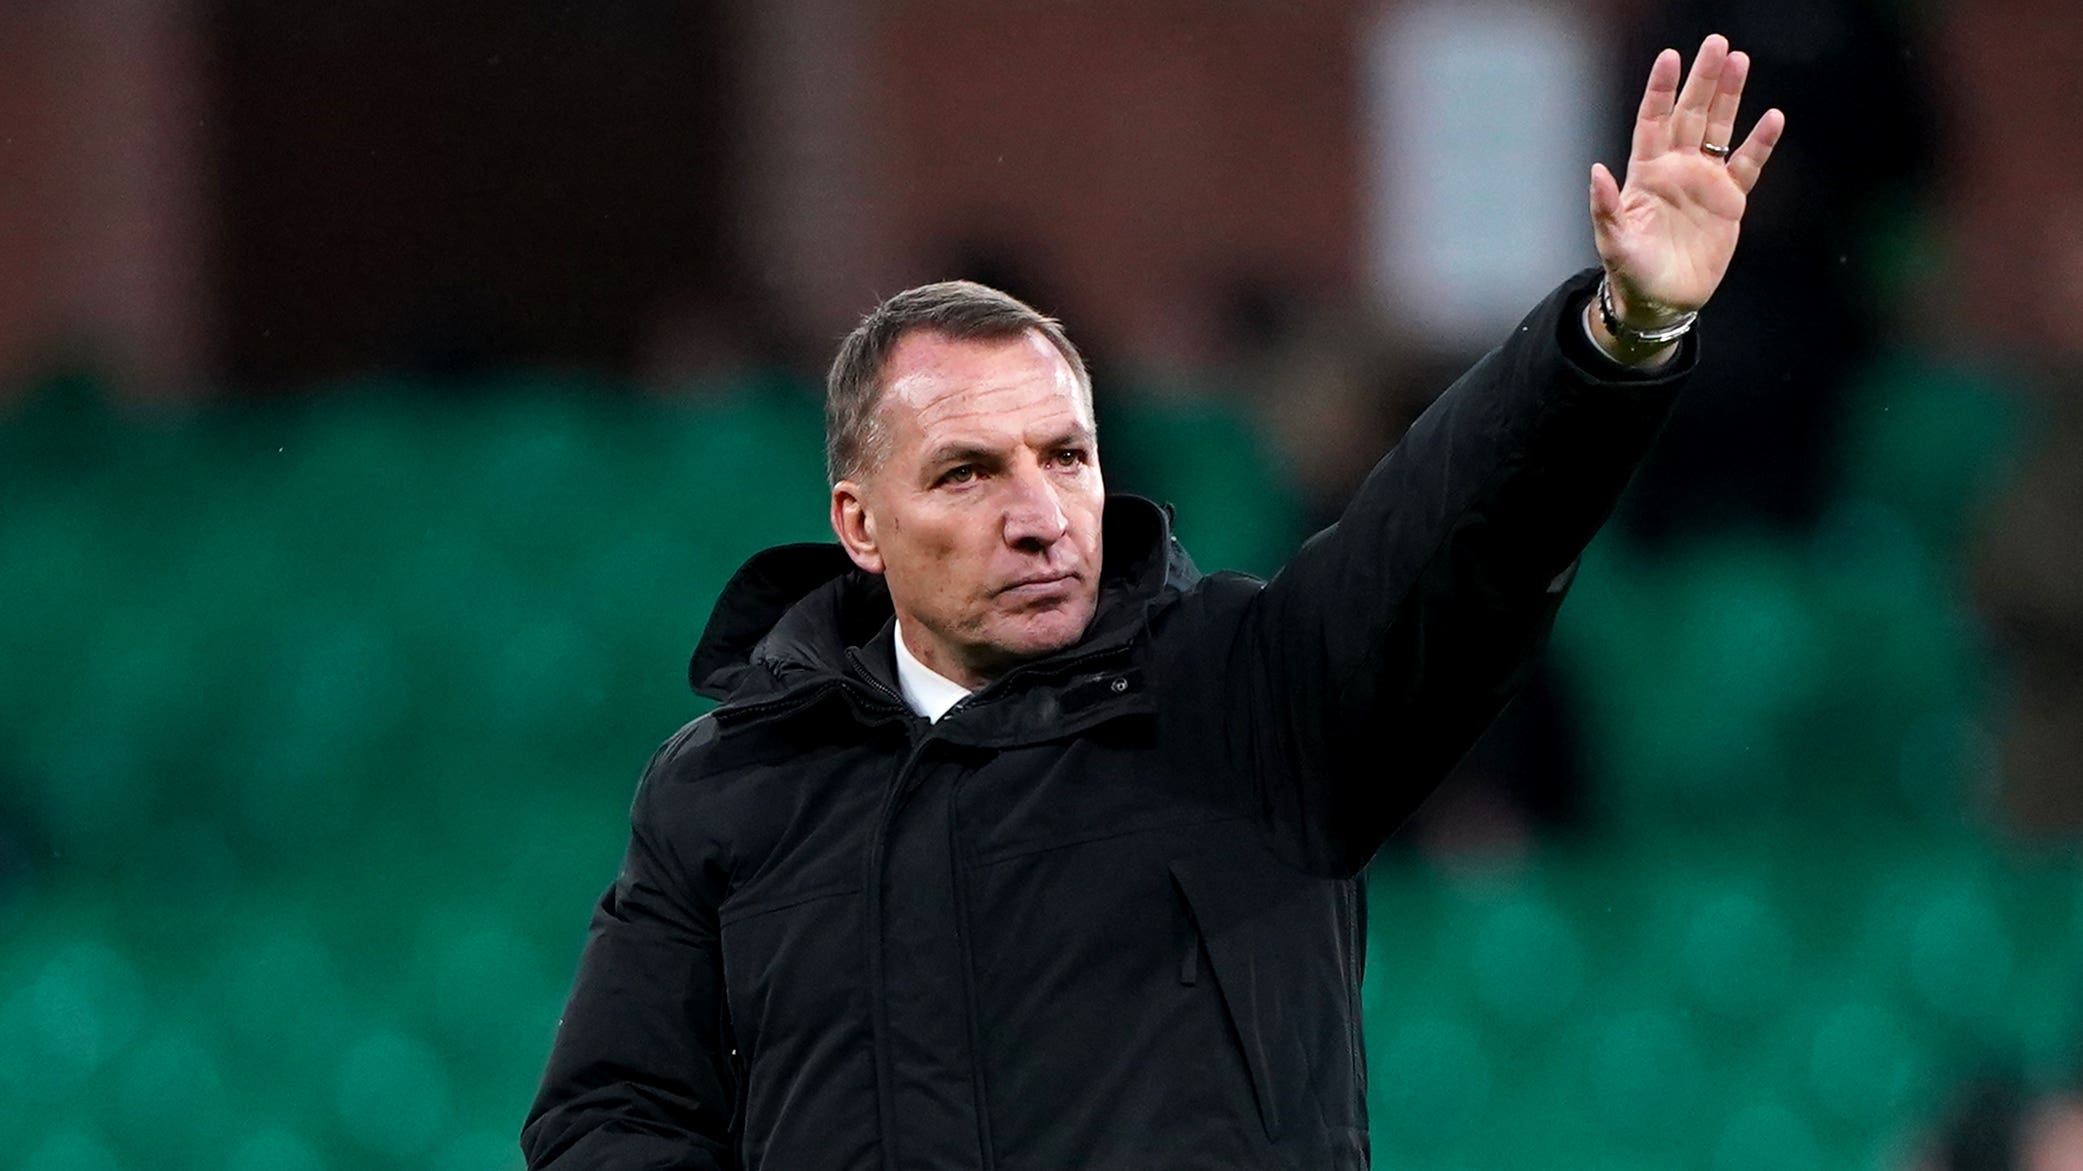 Brendan Rodgers will not ‘beg’ players to join Celtic as he plans squad revamp